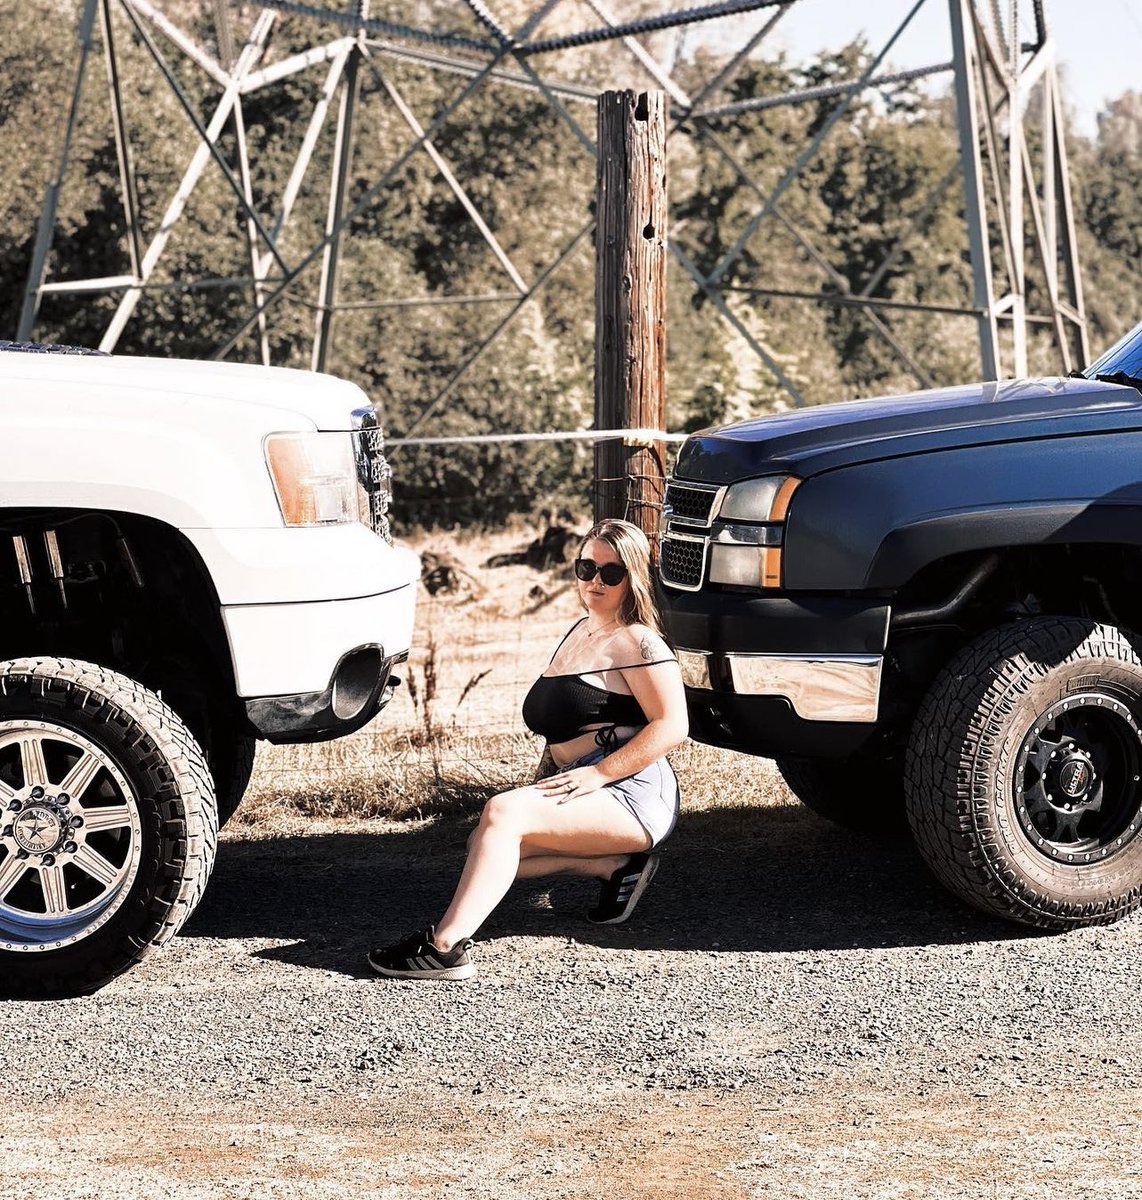 Honestly grew up being a truck girl.. love my chevys most though 🤭

#modeling #chevymodel #modellife #trucks #chevy #explore #chevylife #modeling #model #onlyfans